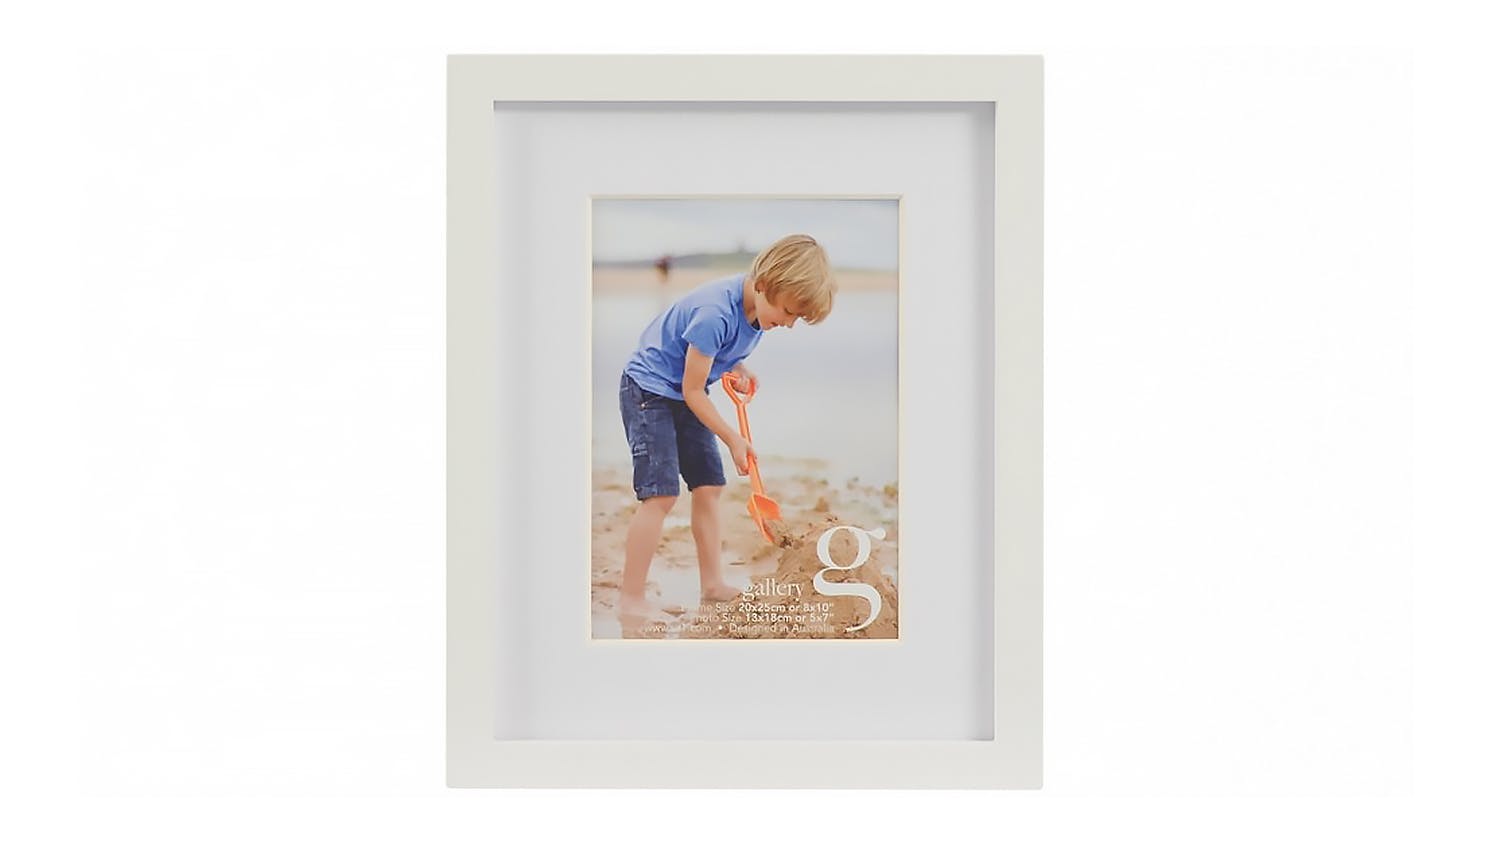 UR1 Gallery 8x10 Photo Frame with 5x7 Opening - White